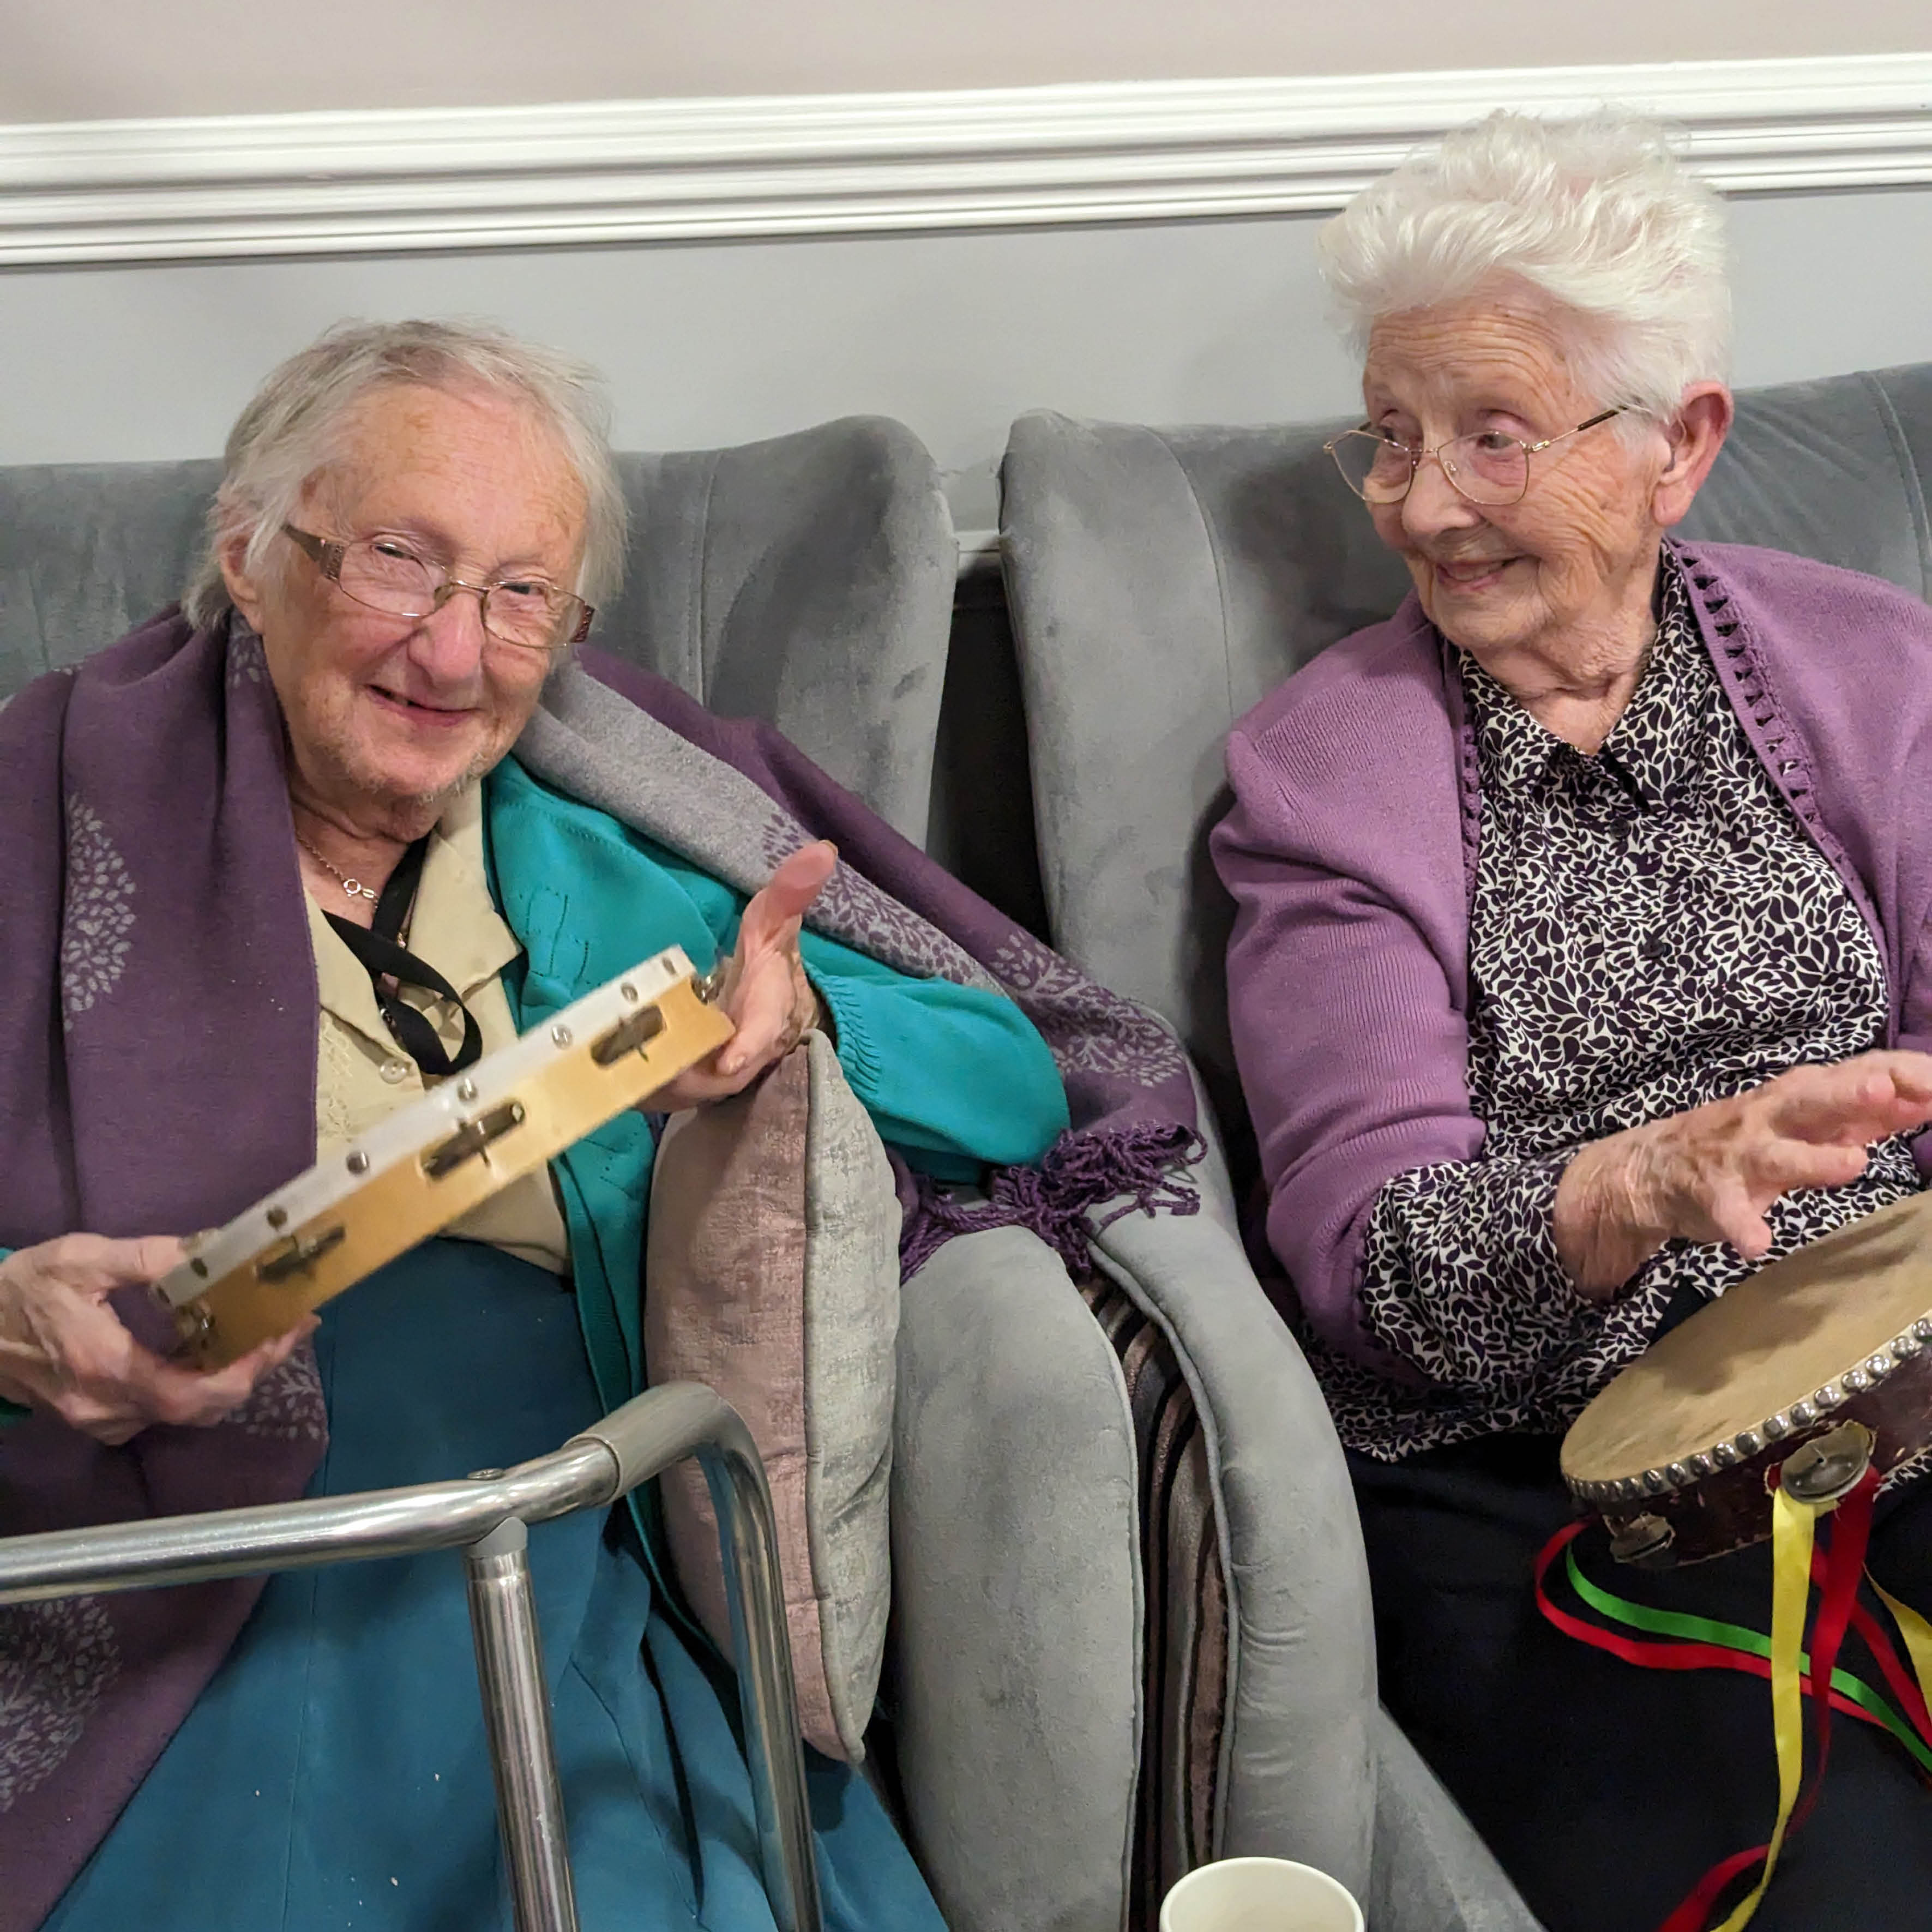 The Woodwind of Stortford visit The Grange Care Home